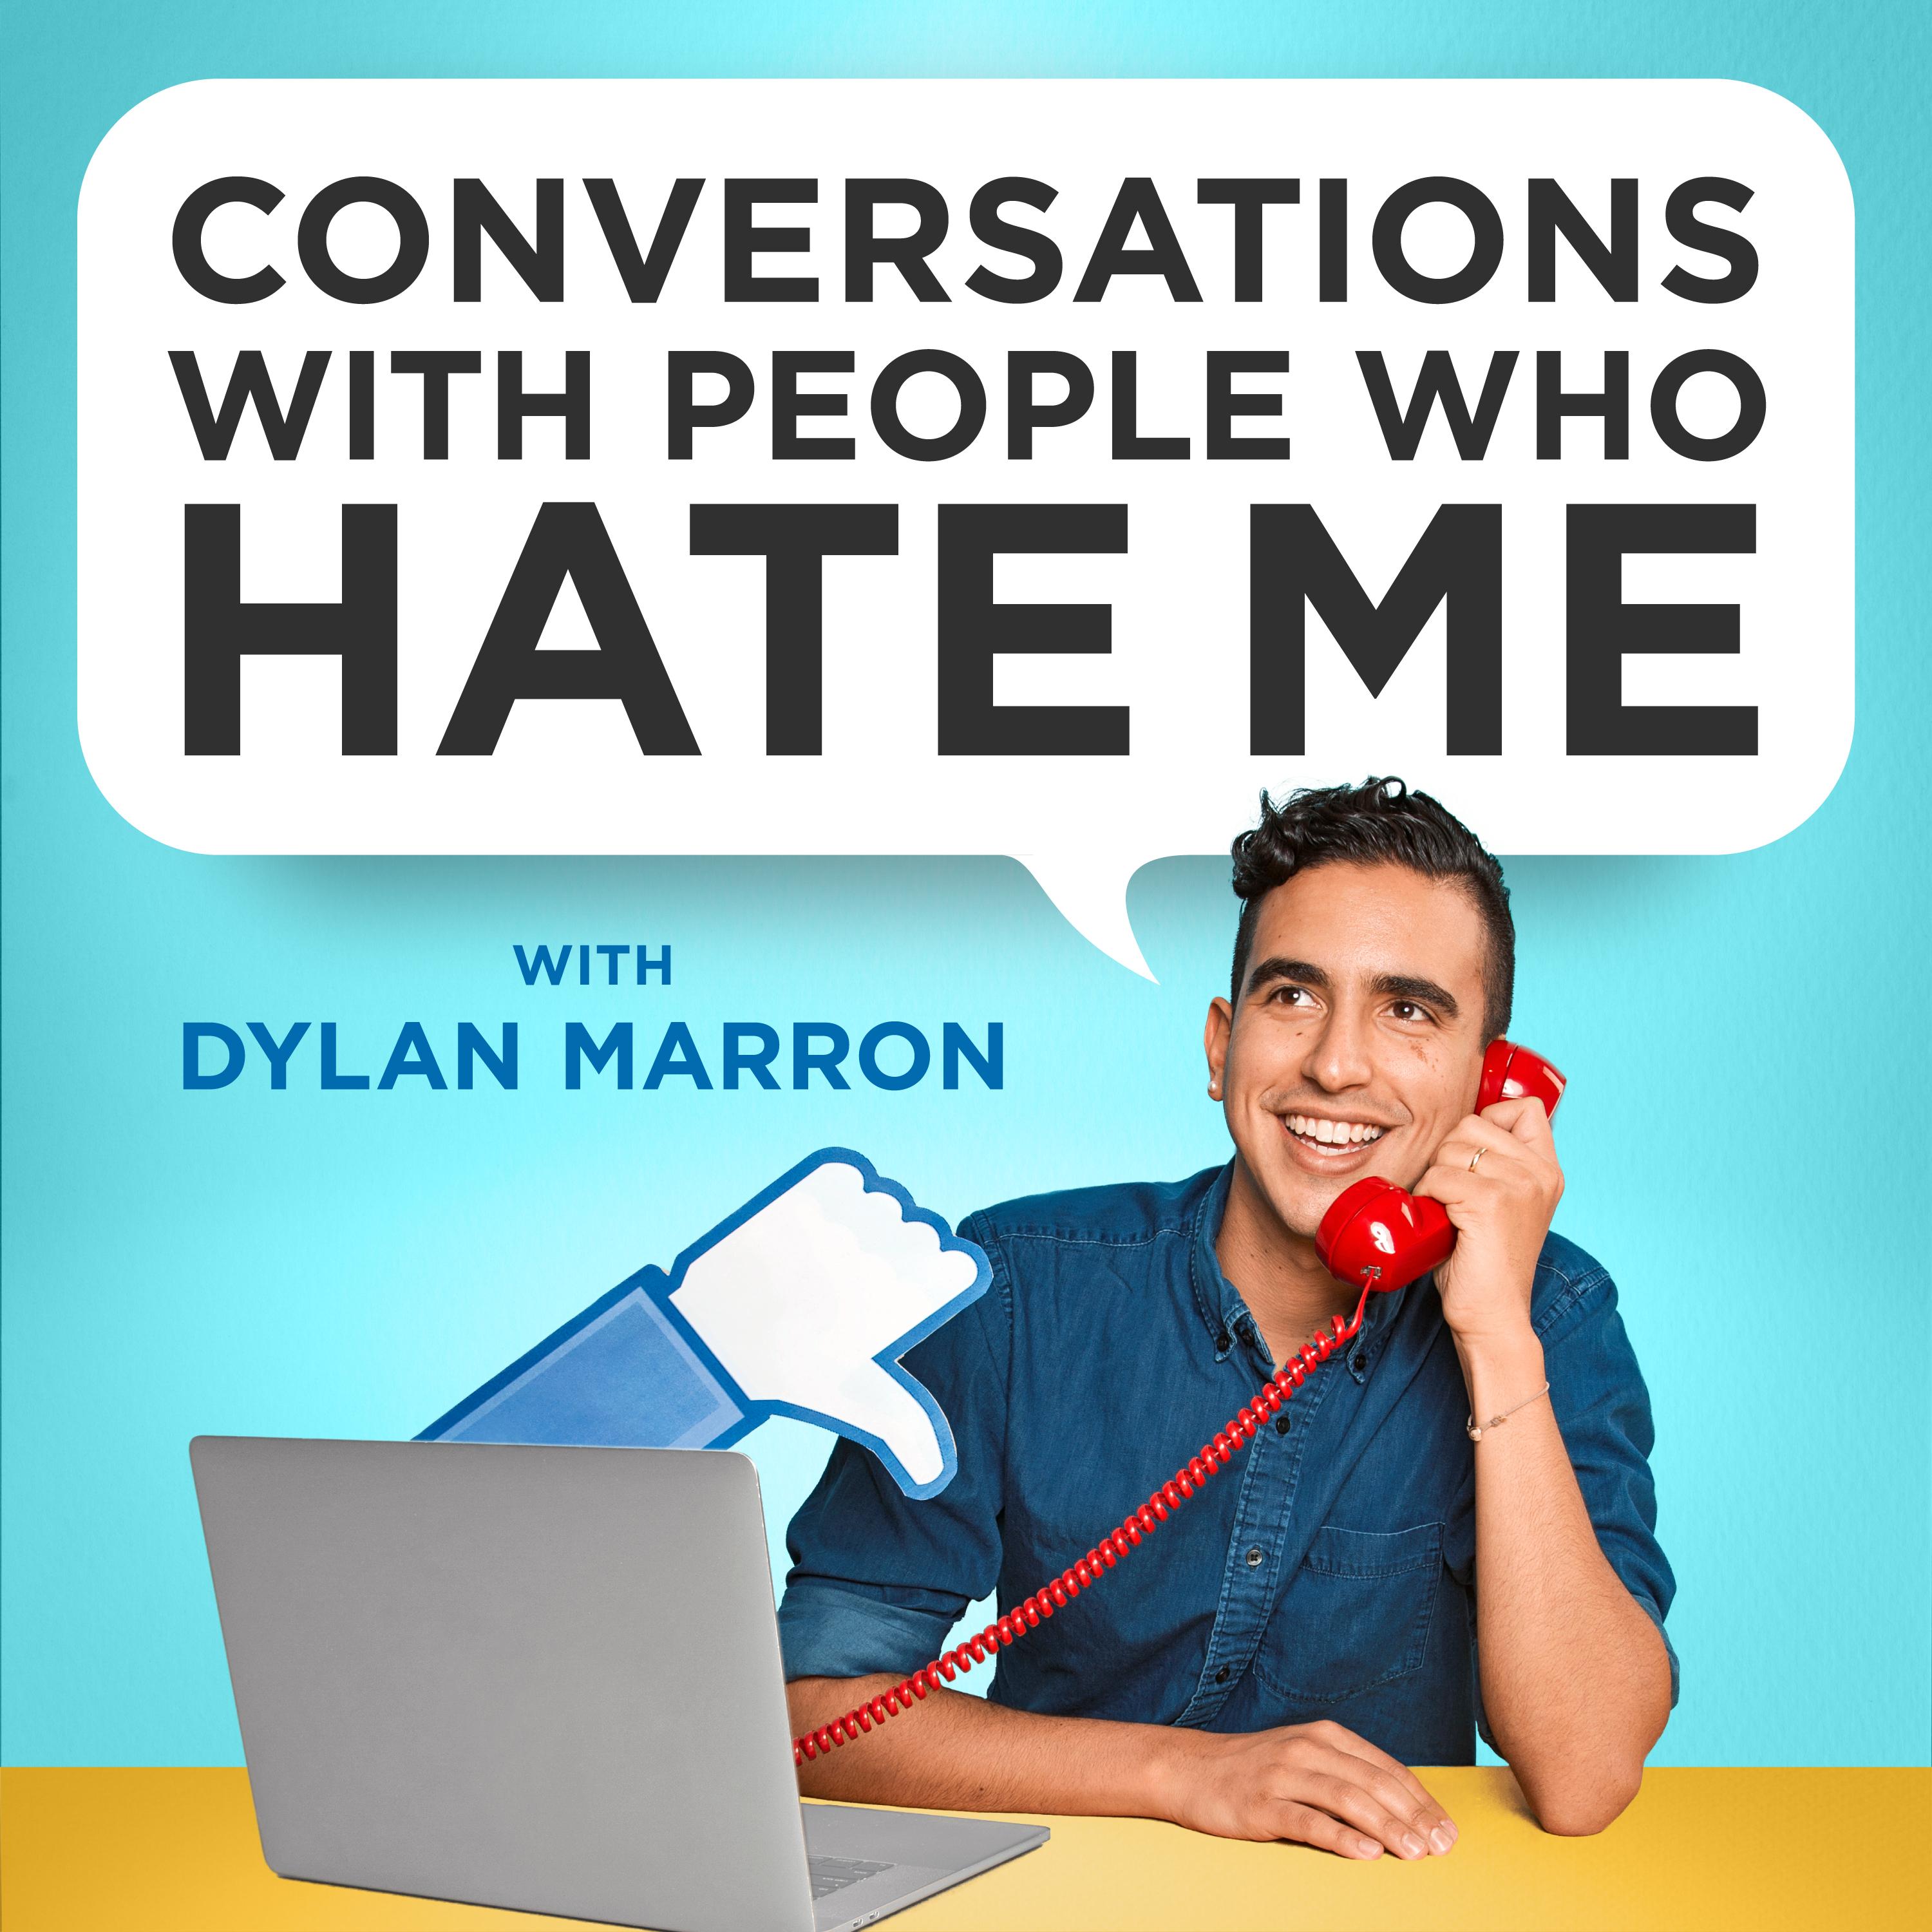 Thumbnail for "Conversations with People Who Hate Me, hosted by Dylan Marron – Teaser".